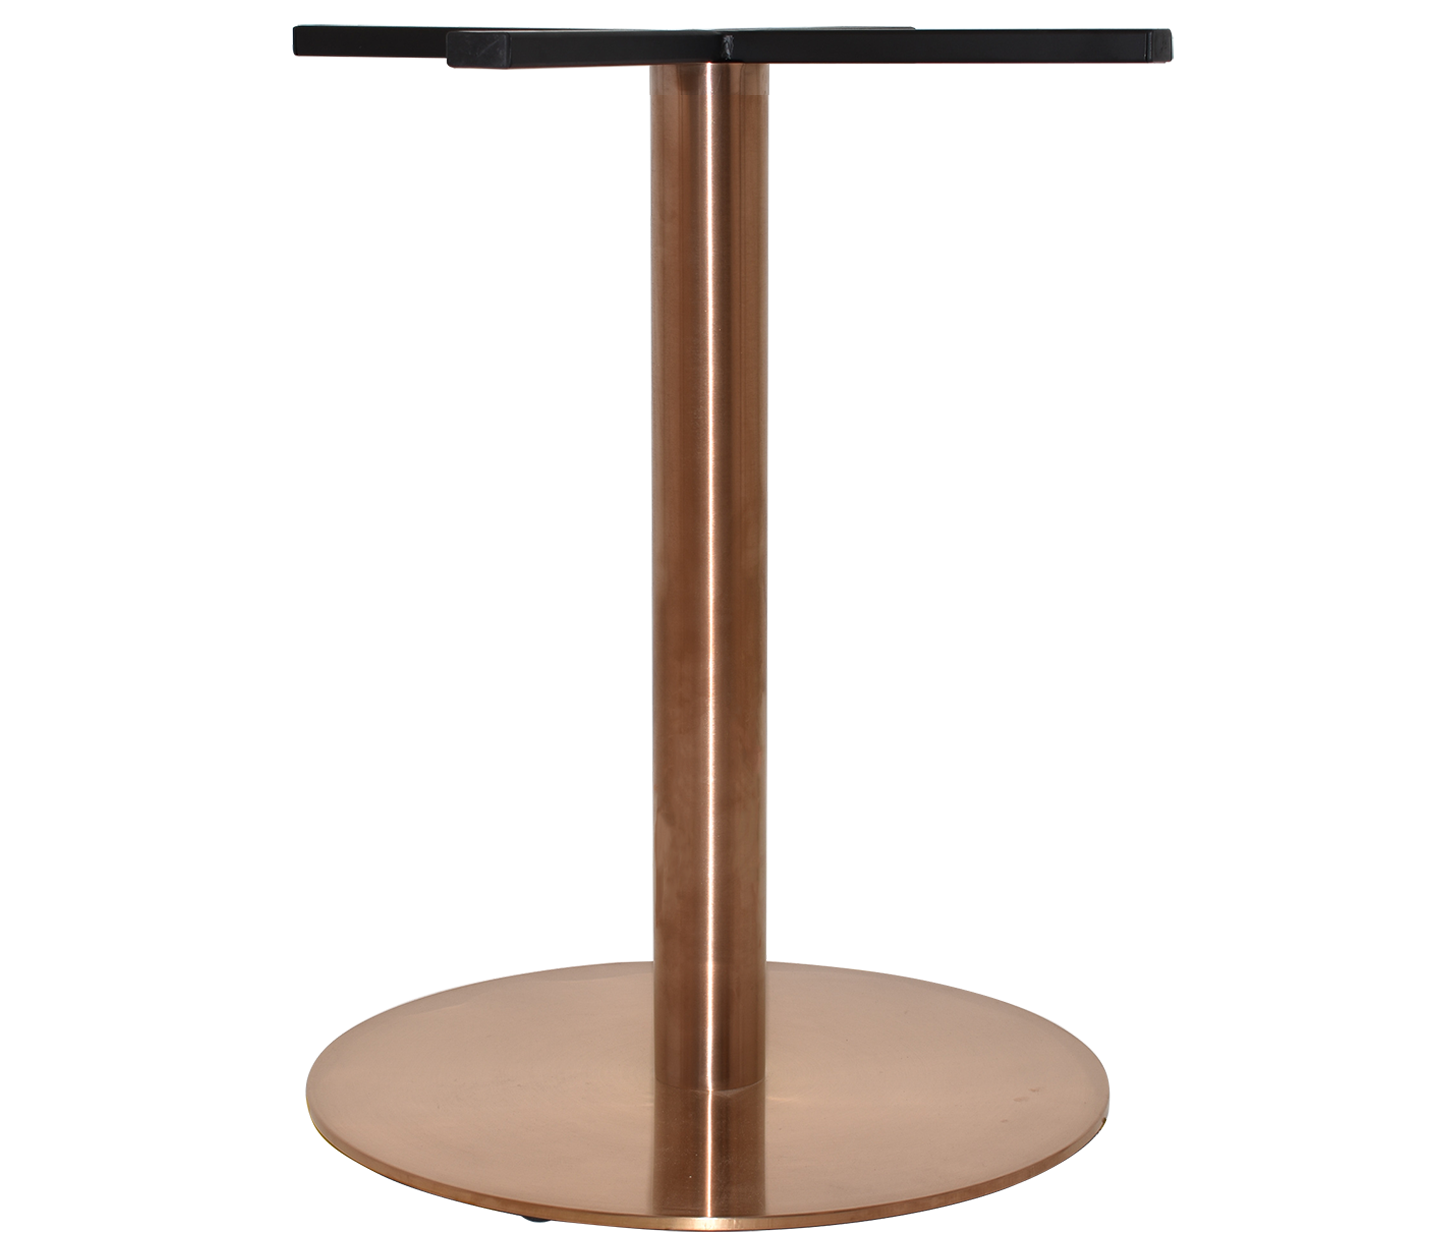 BASE TABLE ROME DISC 540MM COPPER